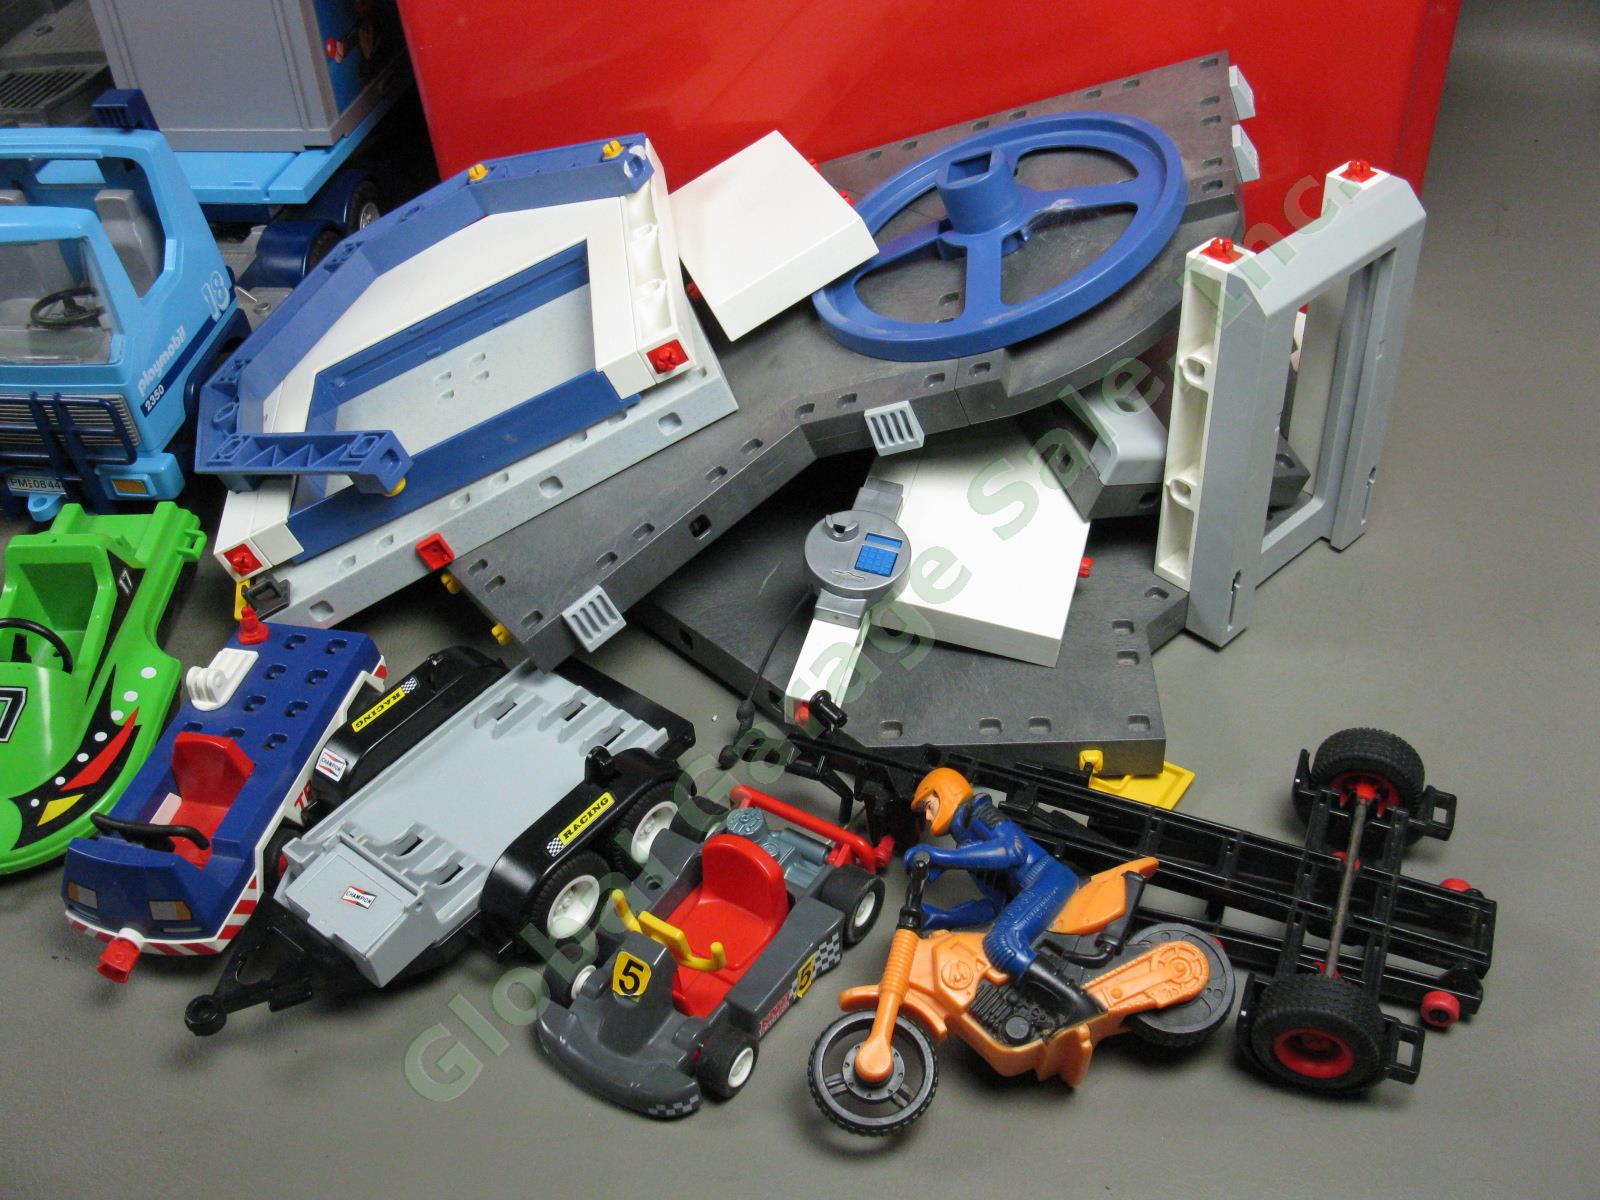 23 lbs Geobra Playmobil Toy Collection Lot Set Airplane Pirate Ship Race Cars NR 4